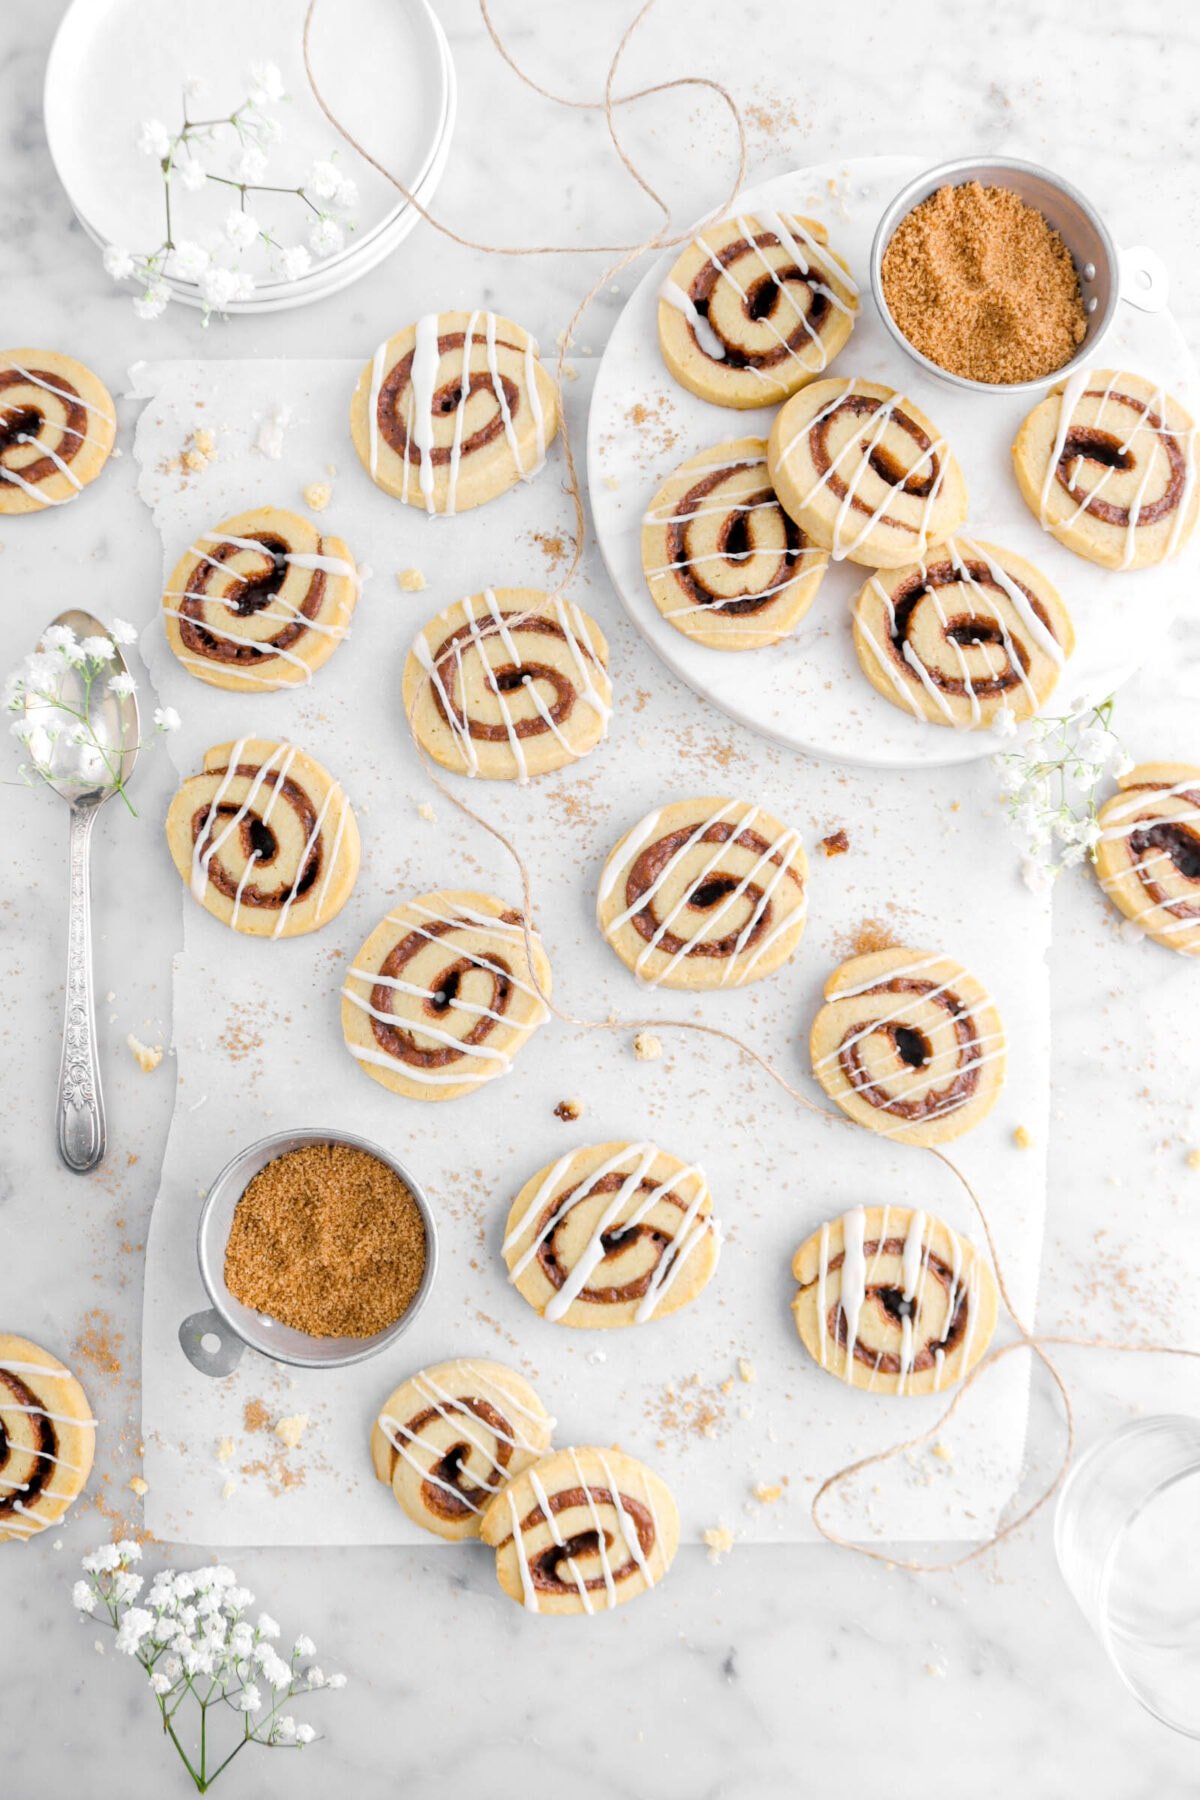 cinnamon roll cookies on parchment paper with marble riser beside with more cookies, two measuring cups of cinnamon sugar, and white flowers around on marble surface.